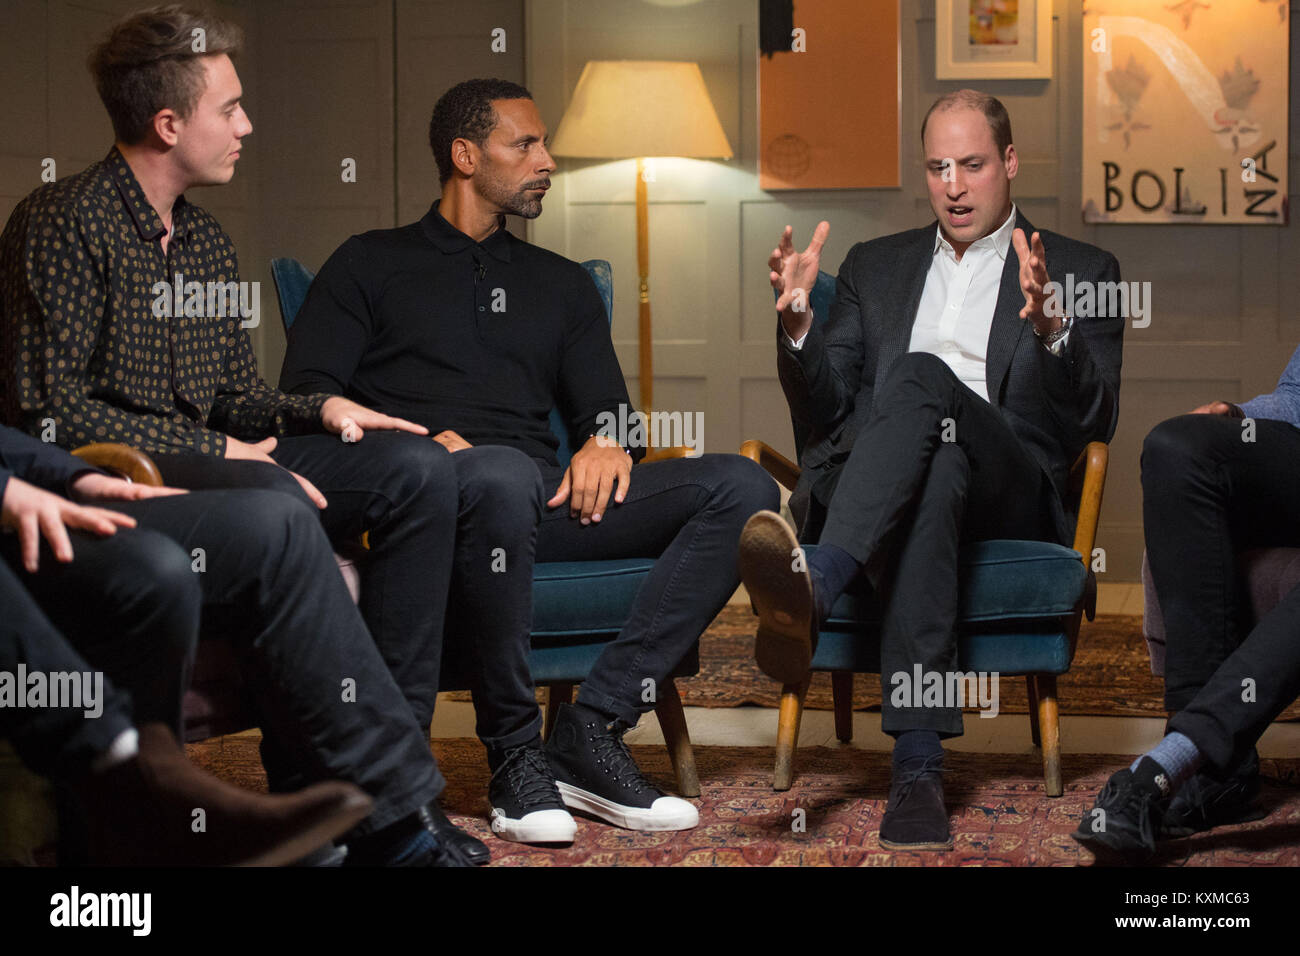 The Duke of Cambridge (right) with Rio Ferdinand (centre) and Roman Kemp (left) during a visit to meet staff, volunteers, and supporters of 'Campaign Against Living Miserably' (CALM), a charity dedicated to preventing male suicide, to lend his support to their 'Best Man Project' at High Road House, London. Stock Photo